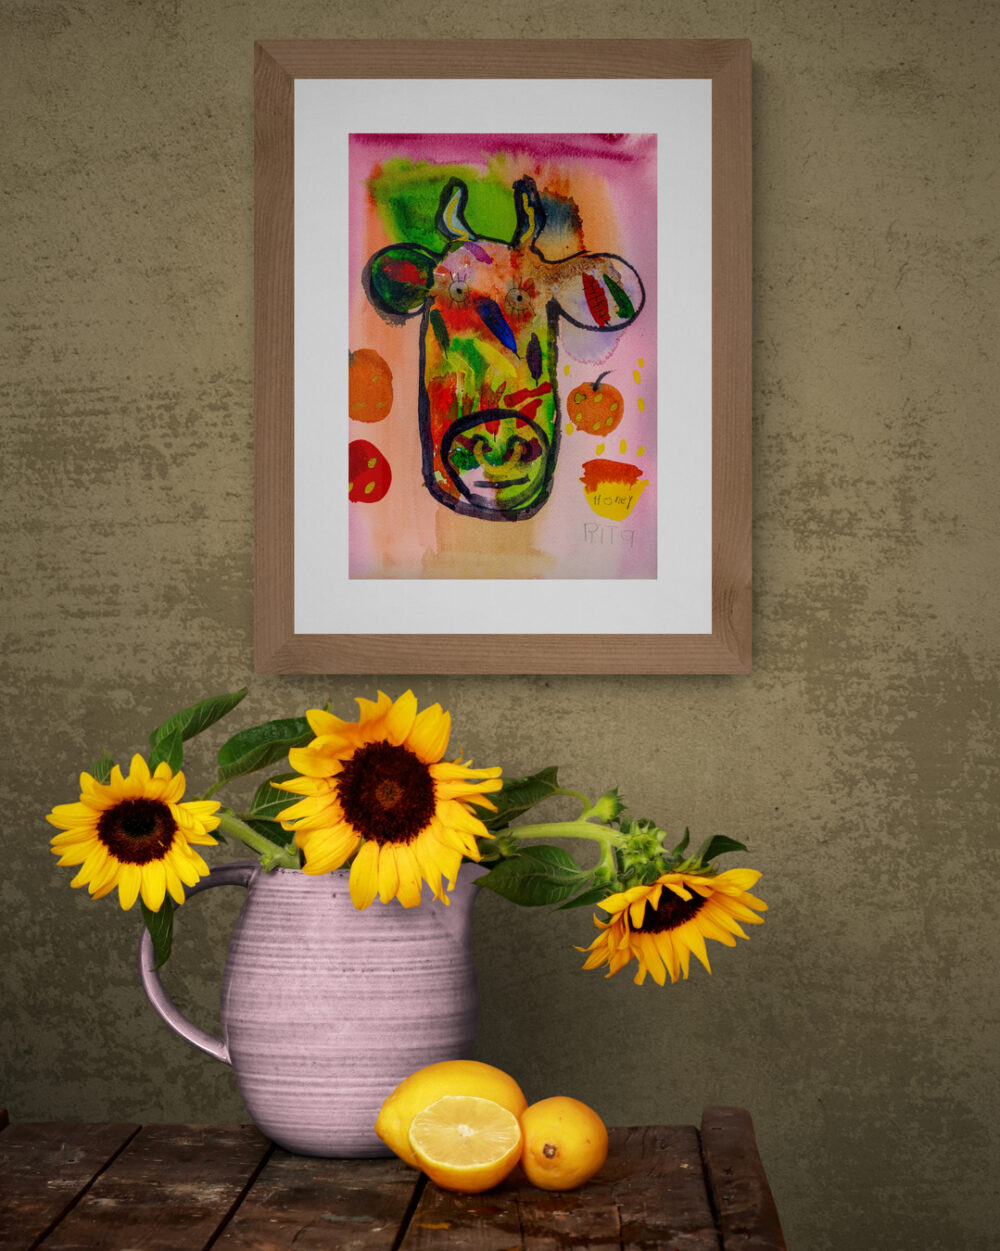 Rustic Bench With Sunflowers In Jug